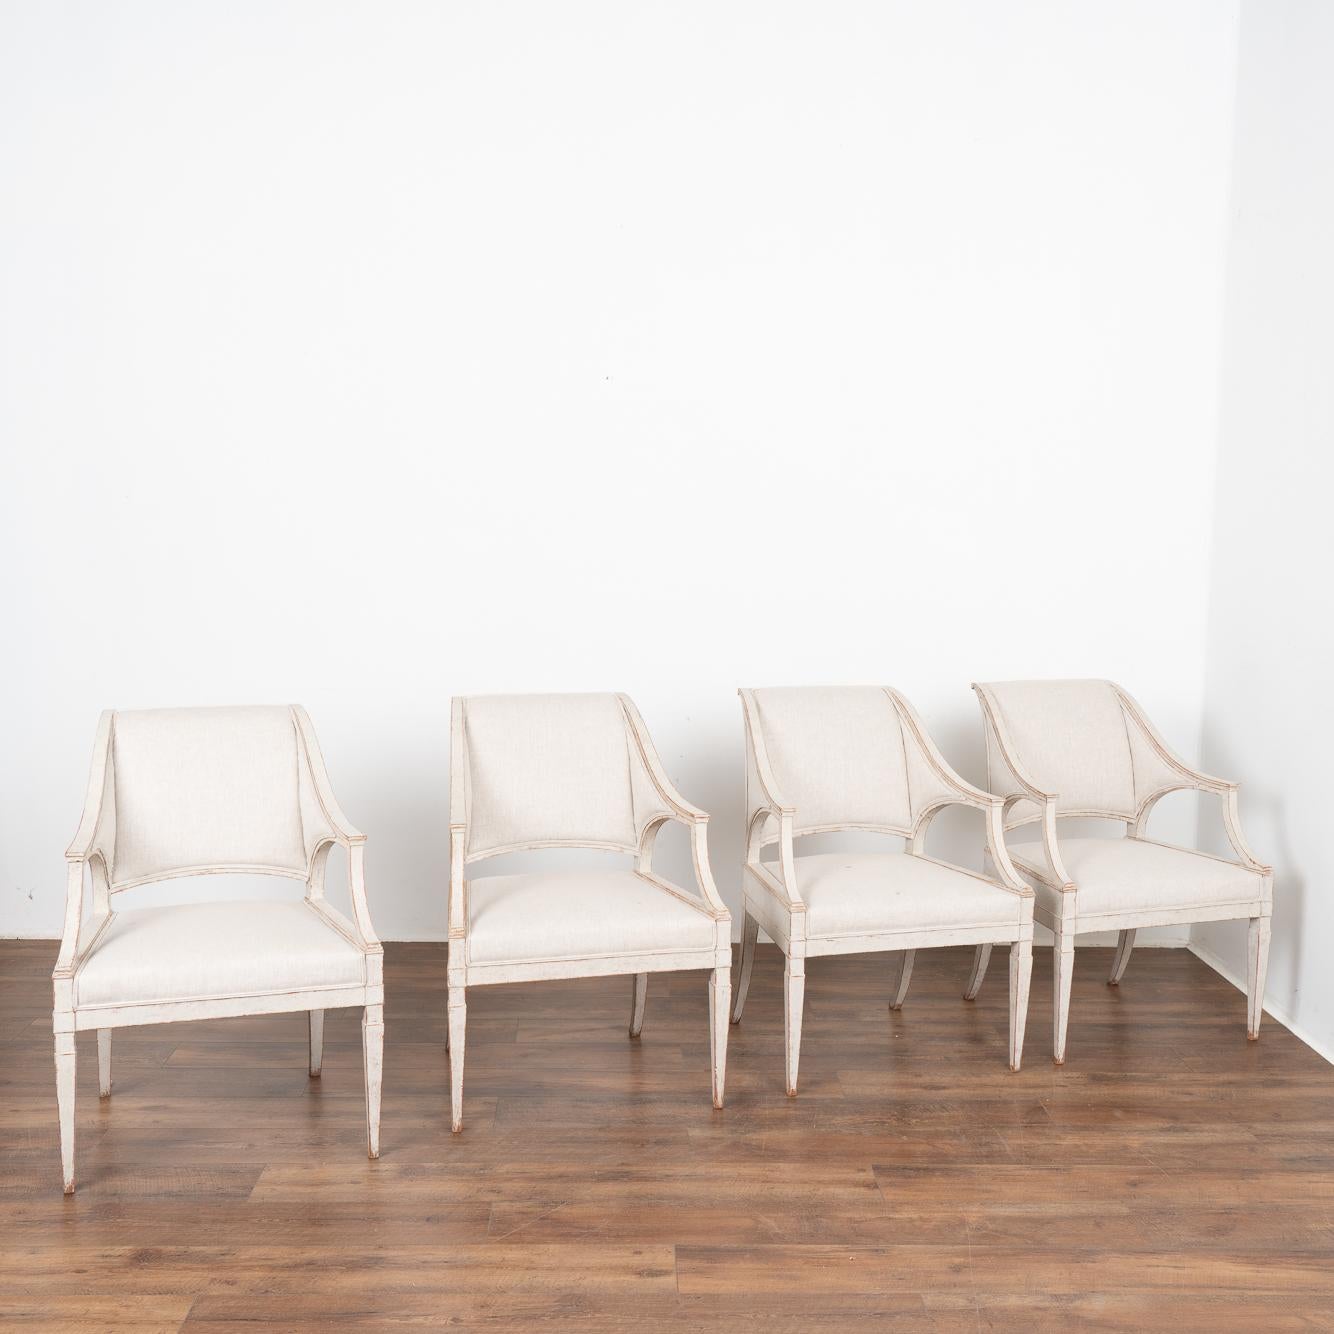 Set of four, sleek and stylish Gustavian Swedish arm chairs with sabre back legs. 
Simple linen upholstery on seat, back and arm sides.
Restored, later professionally painted in layered shades of white and lightly distressed to fit the age and grace